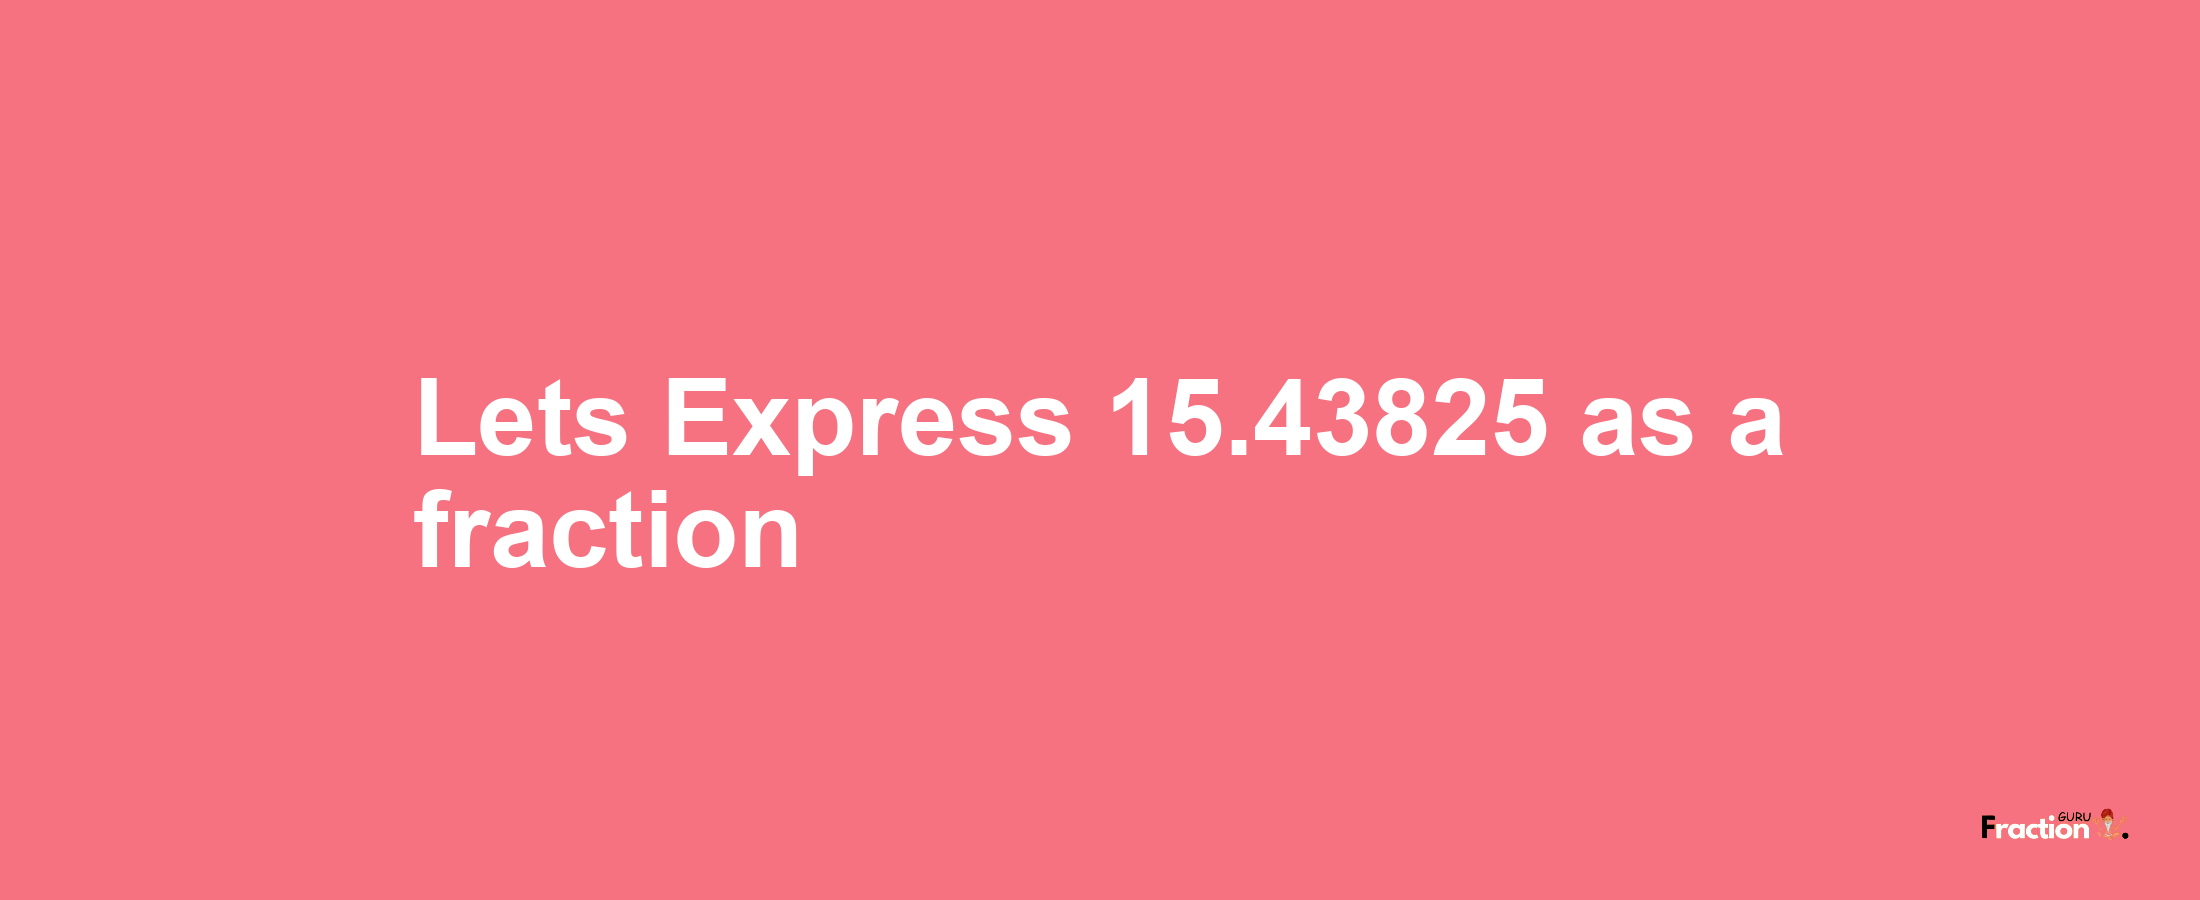 Lets Express 15.43825 as afraction